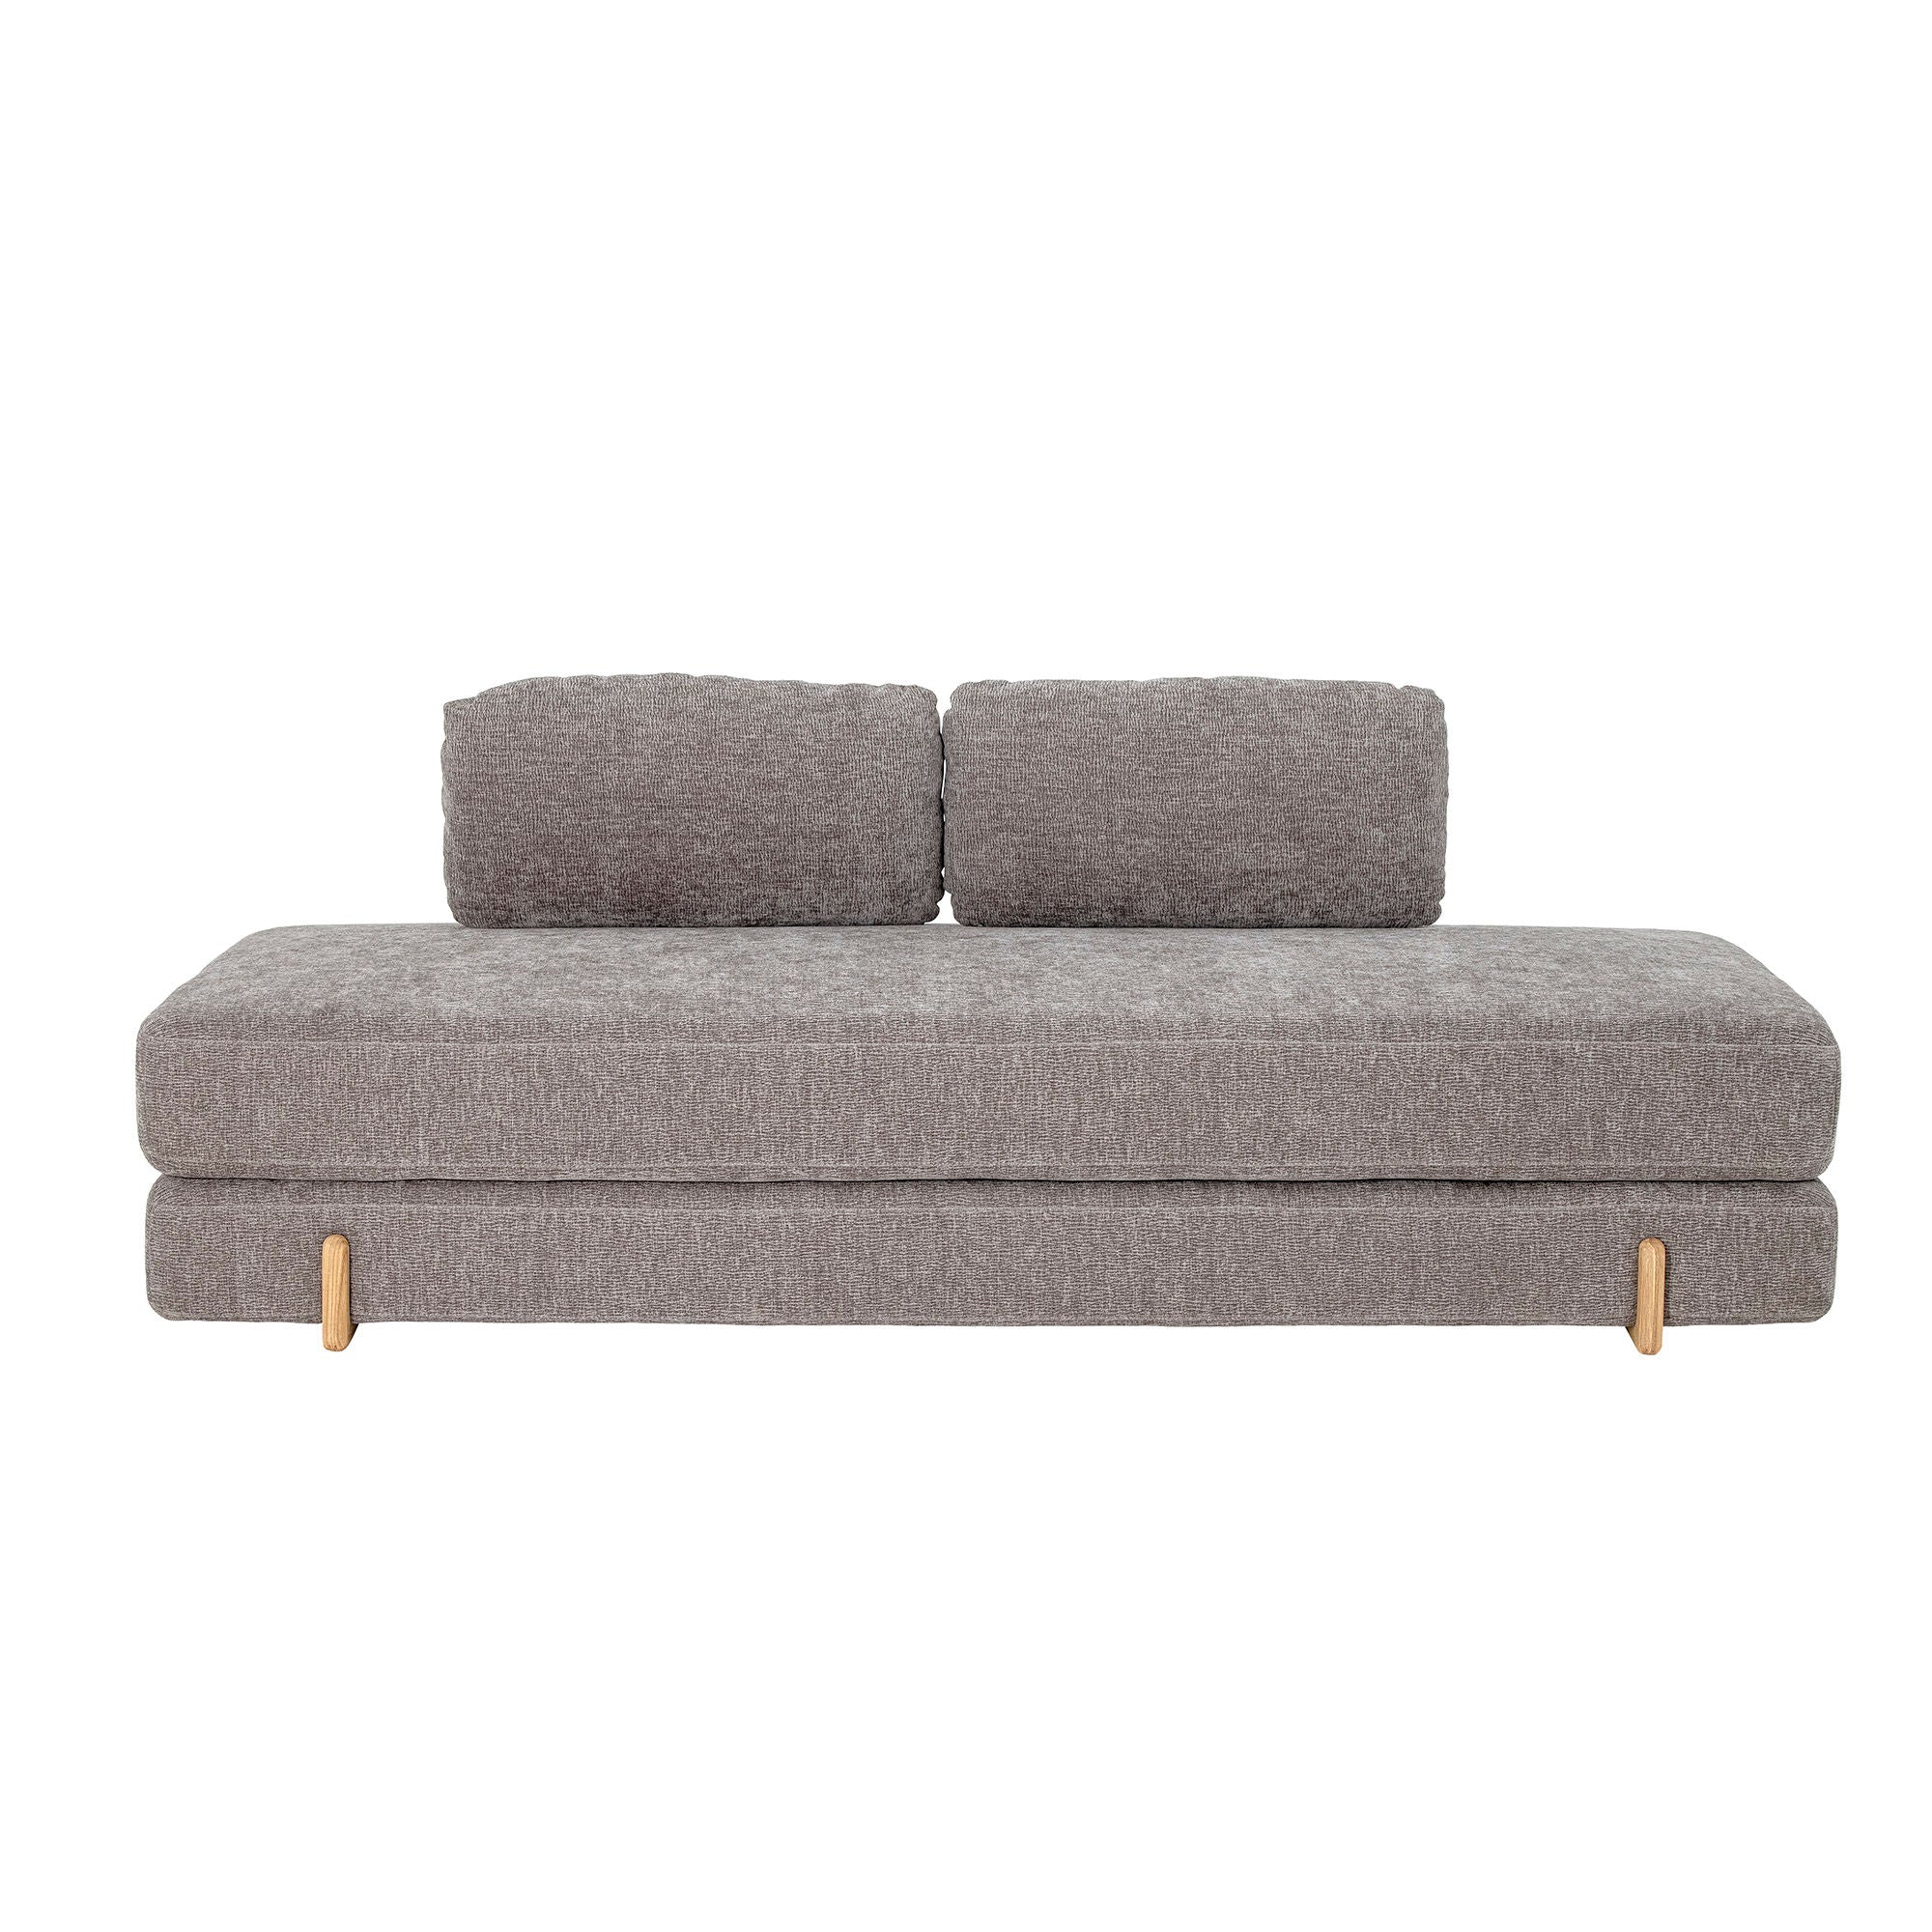 Bloomingville Groove Daybed, gris, poliéster